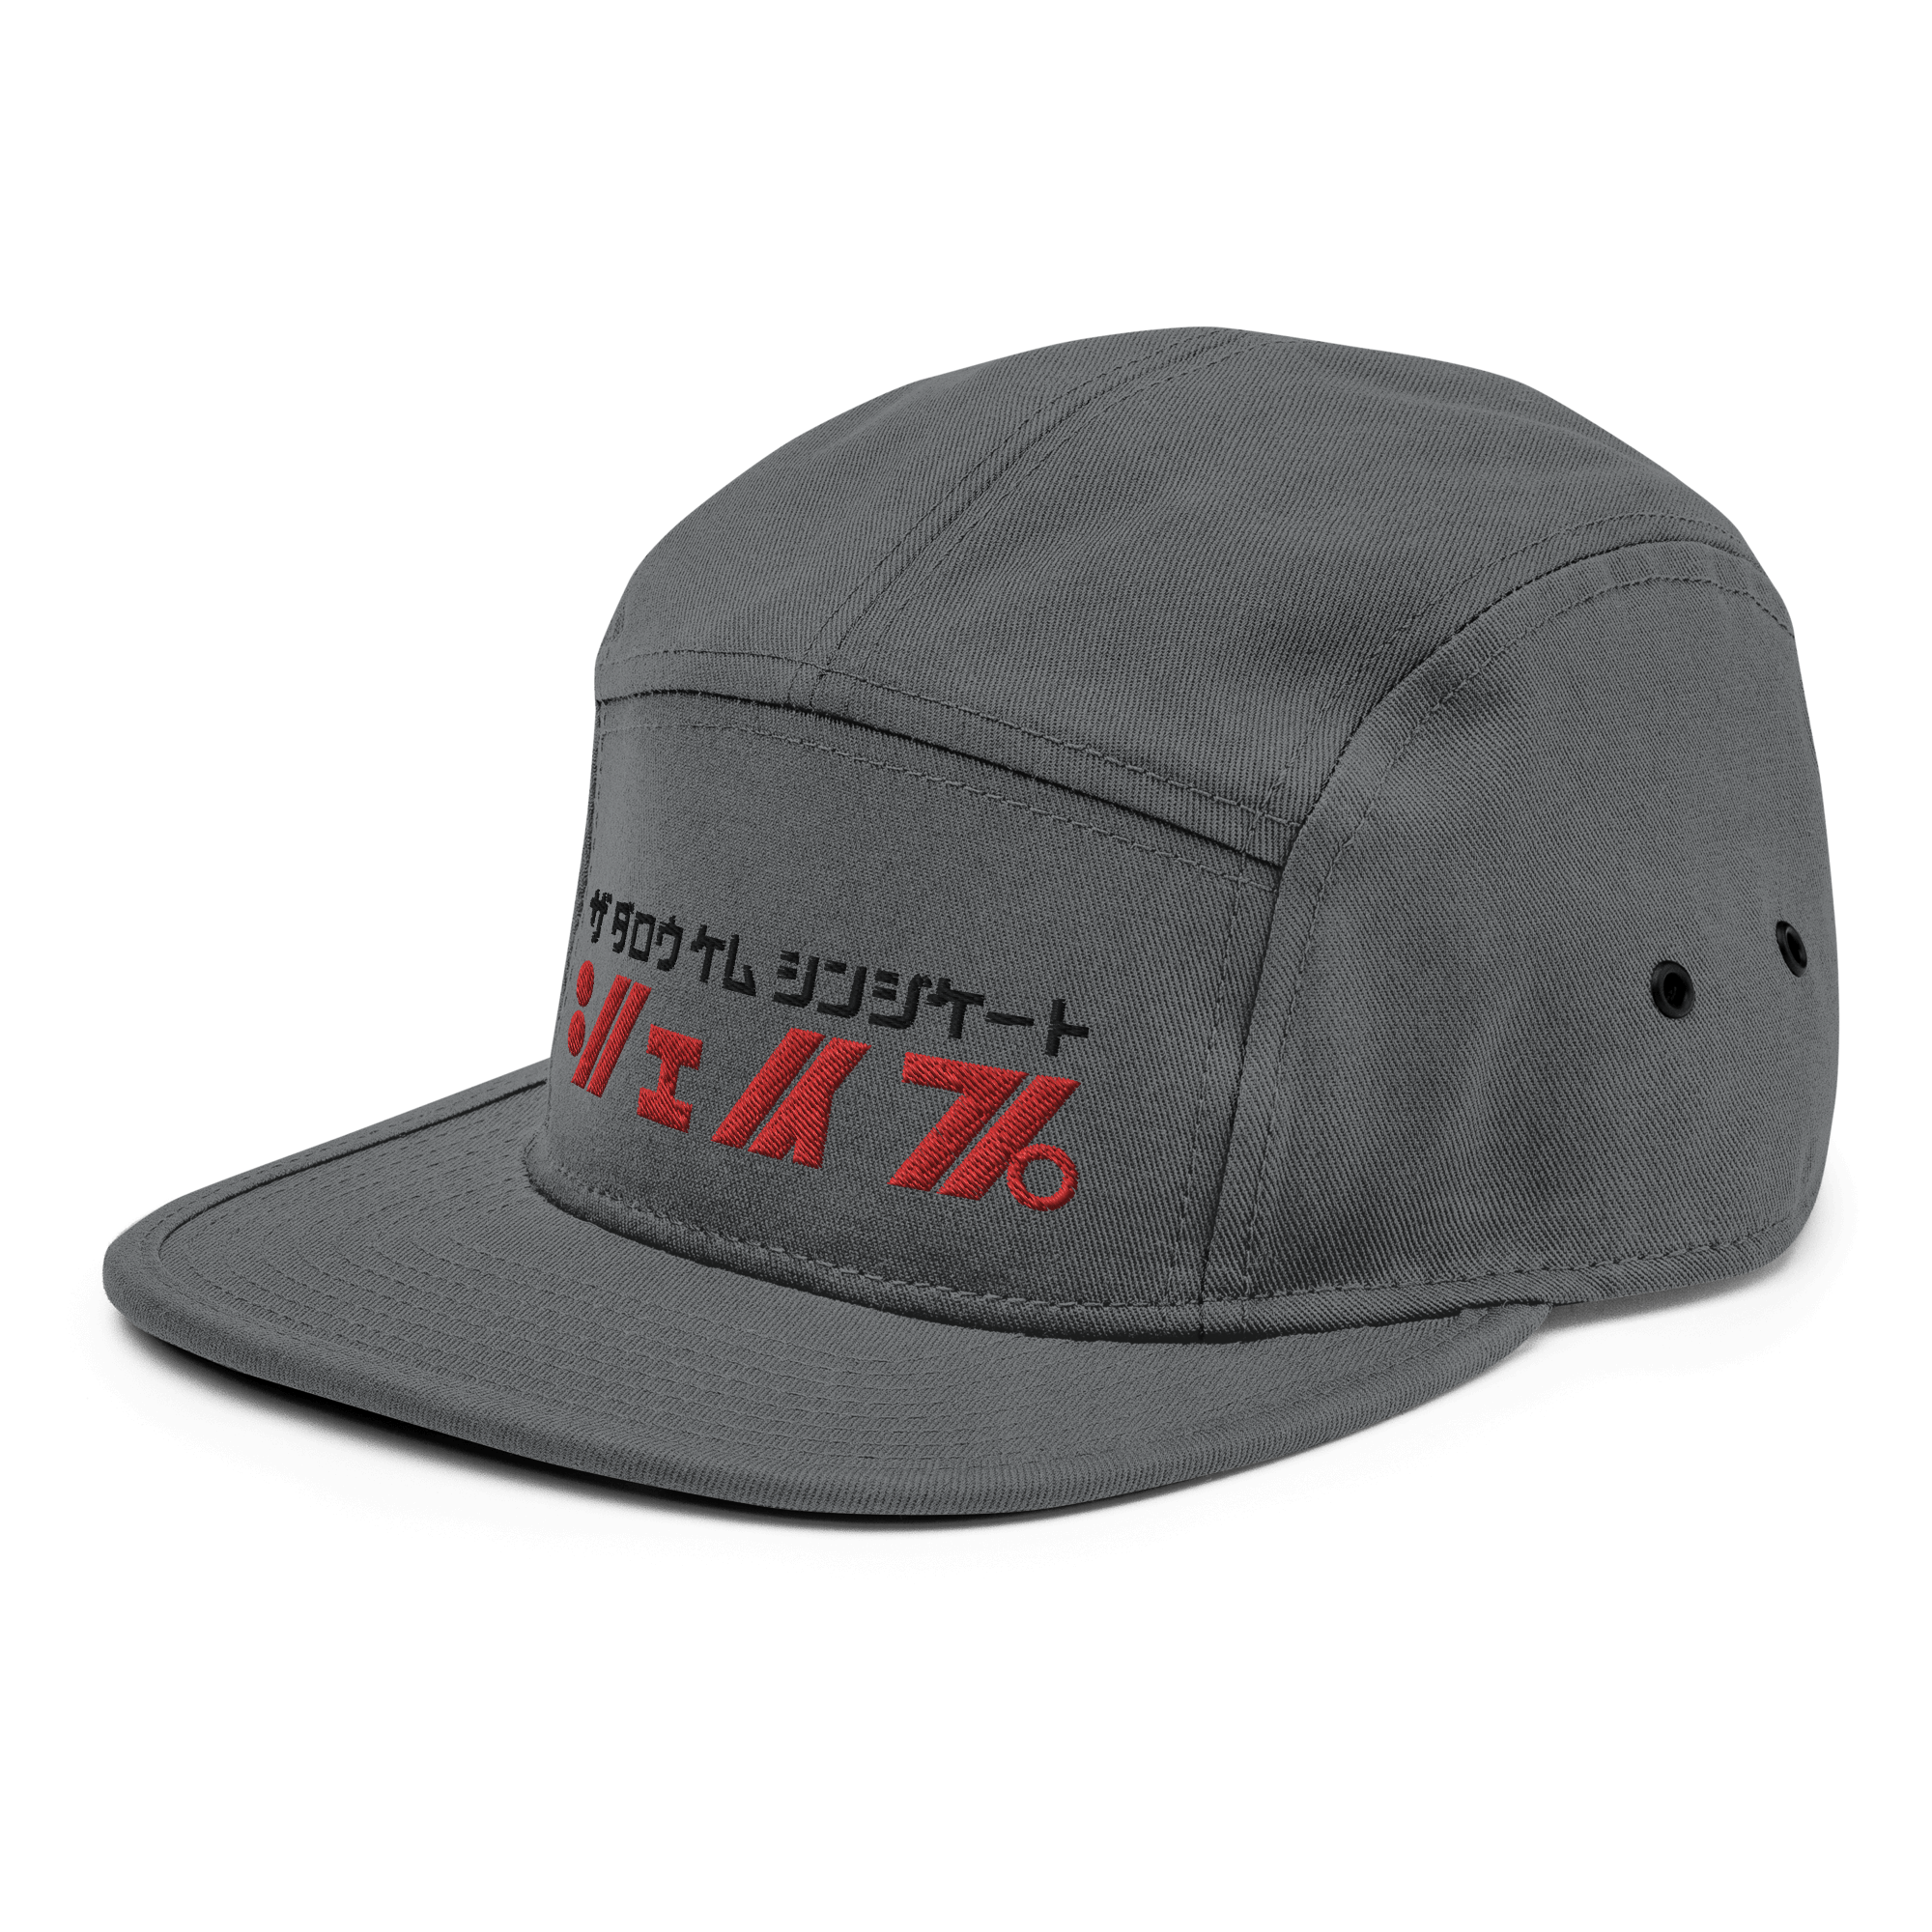 Shape Camper CapUnleash your style with the “Shape" with The Darrow Chem Syndicate Camper Cap. Designed in a Japanese katakana retro font, it's a fusion of fashion and nostalgia. The structured camper style and firm front panel make it a standout accessor